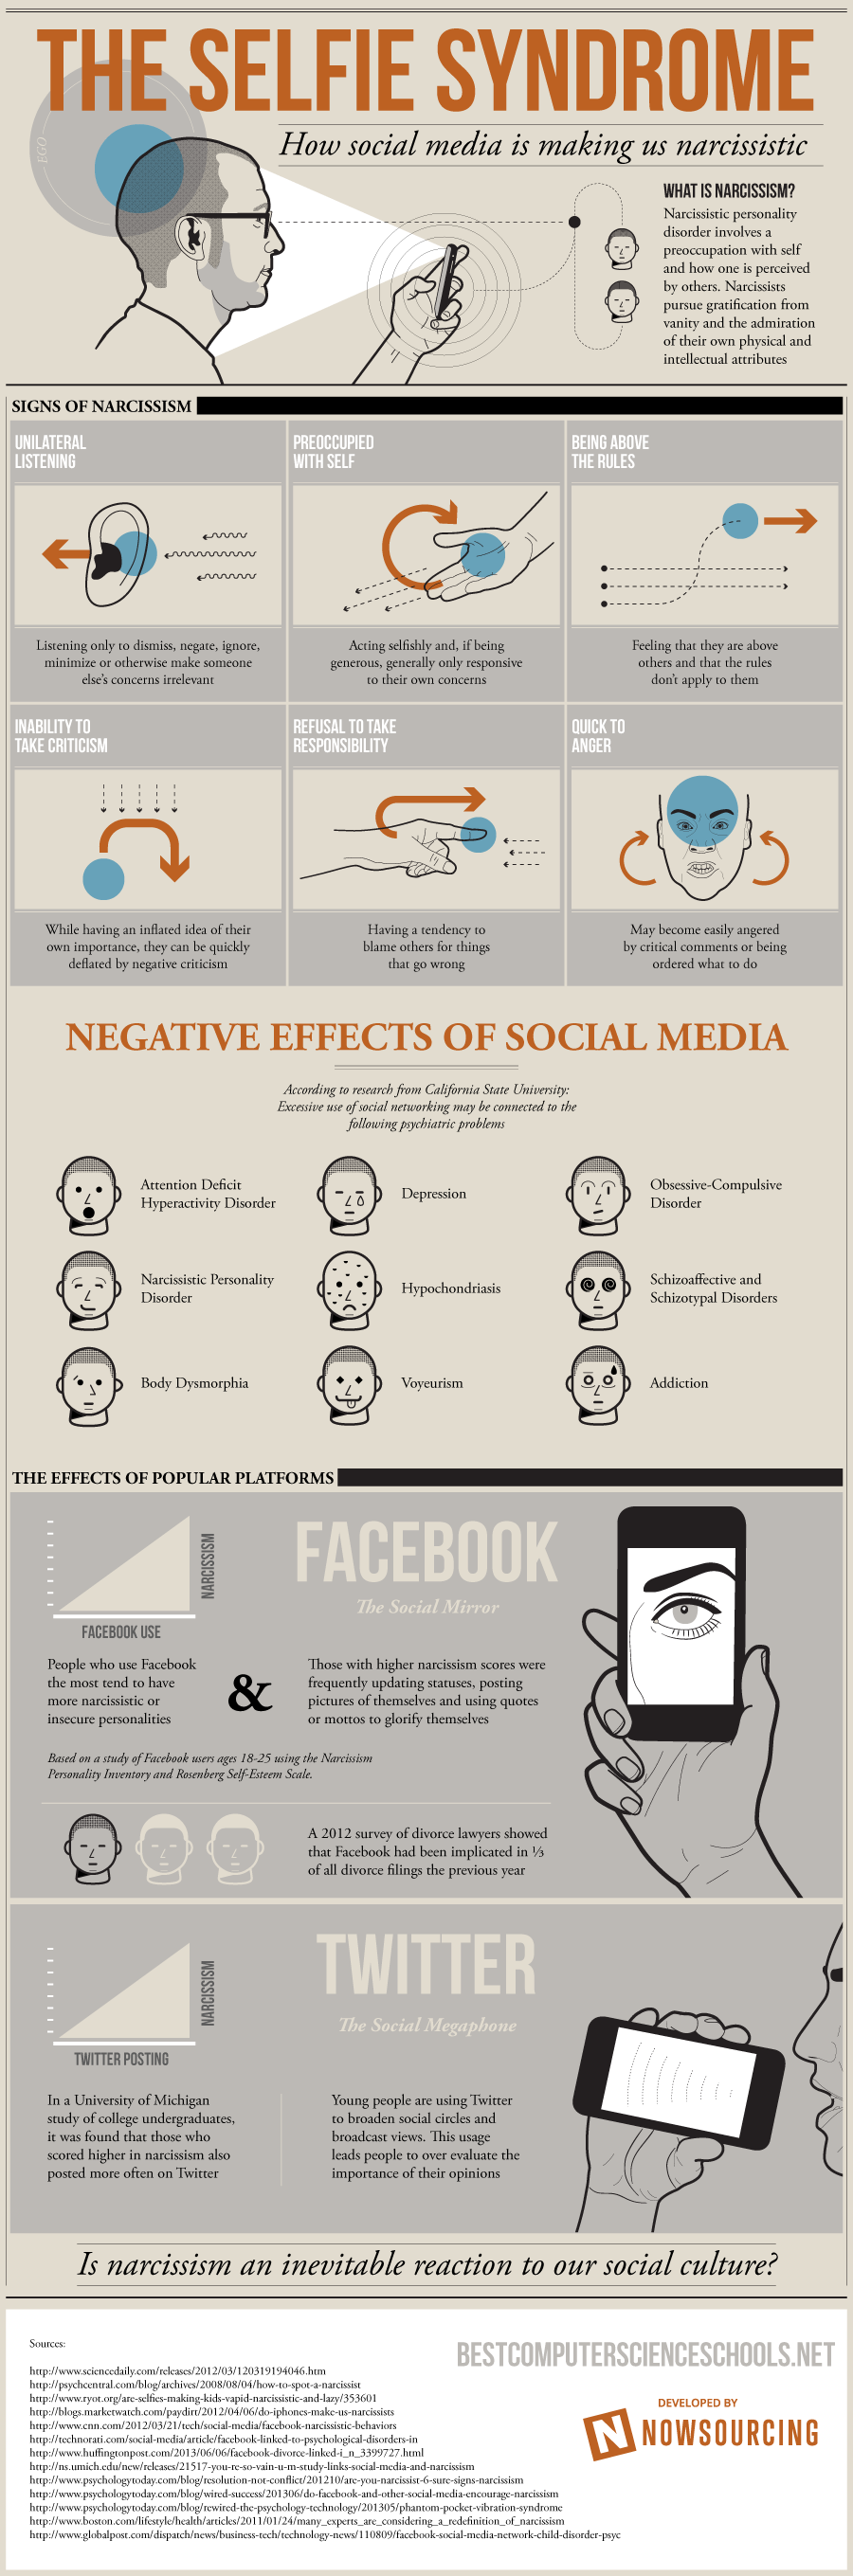 Selfie Syndrome How Social Media is Making Us Narcissistic [Infographic]